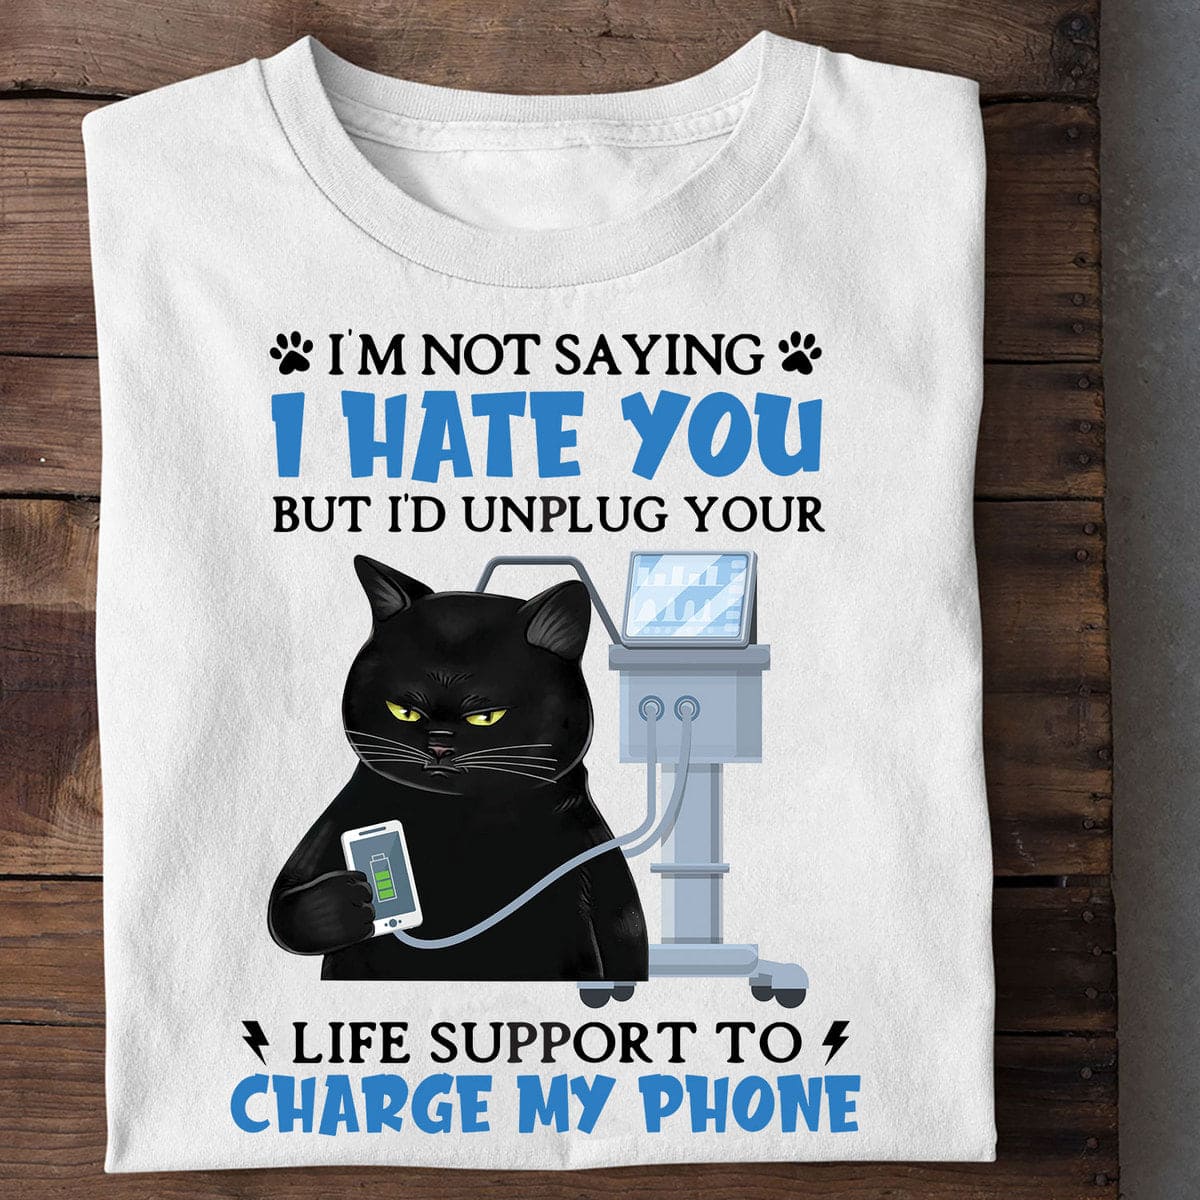 I'm not saying i hate you but i'd unplug your life support to charge my phone - Bad Black Cat Charge Phone